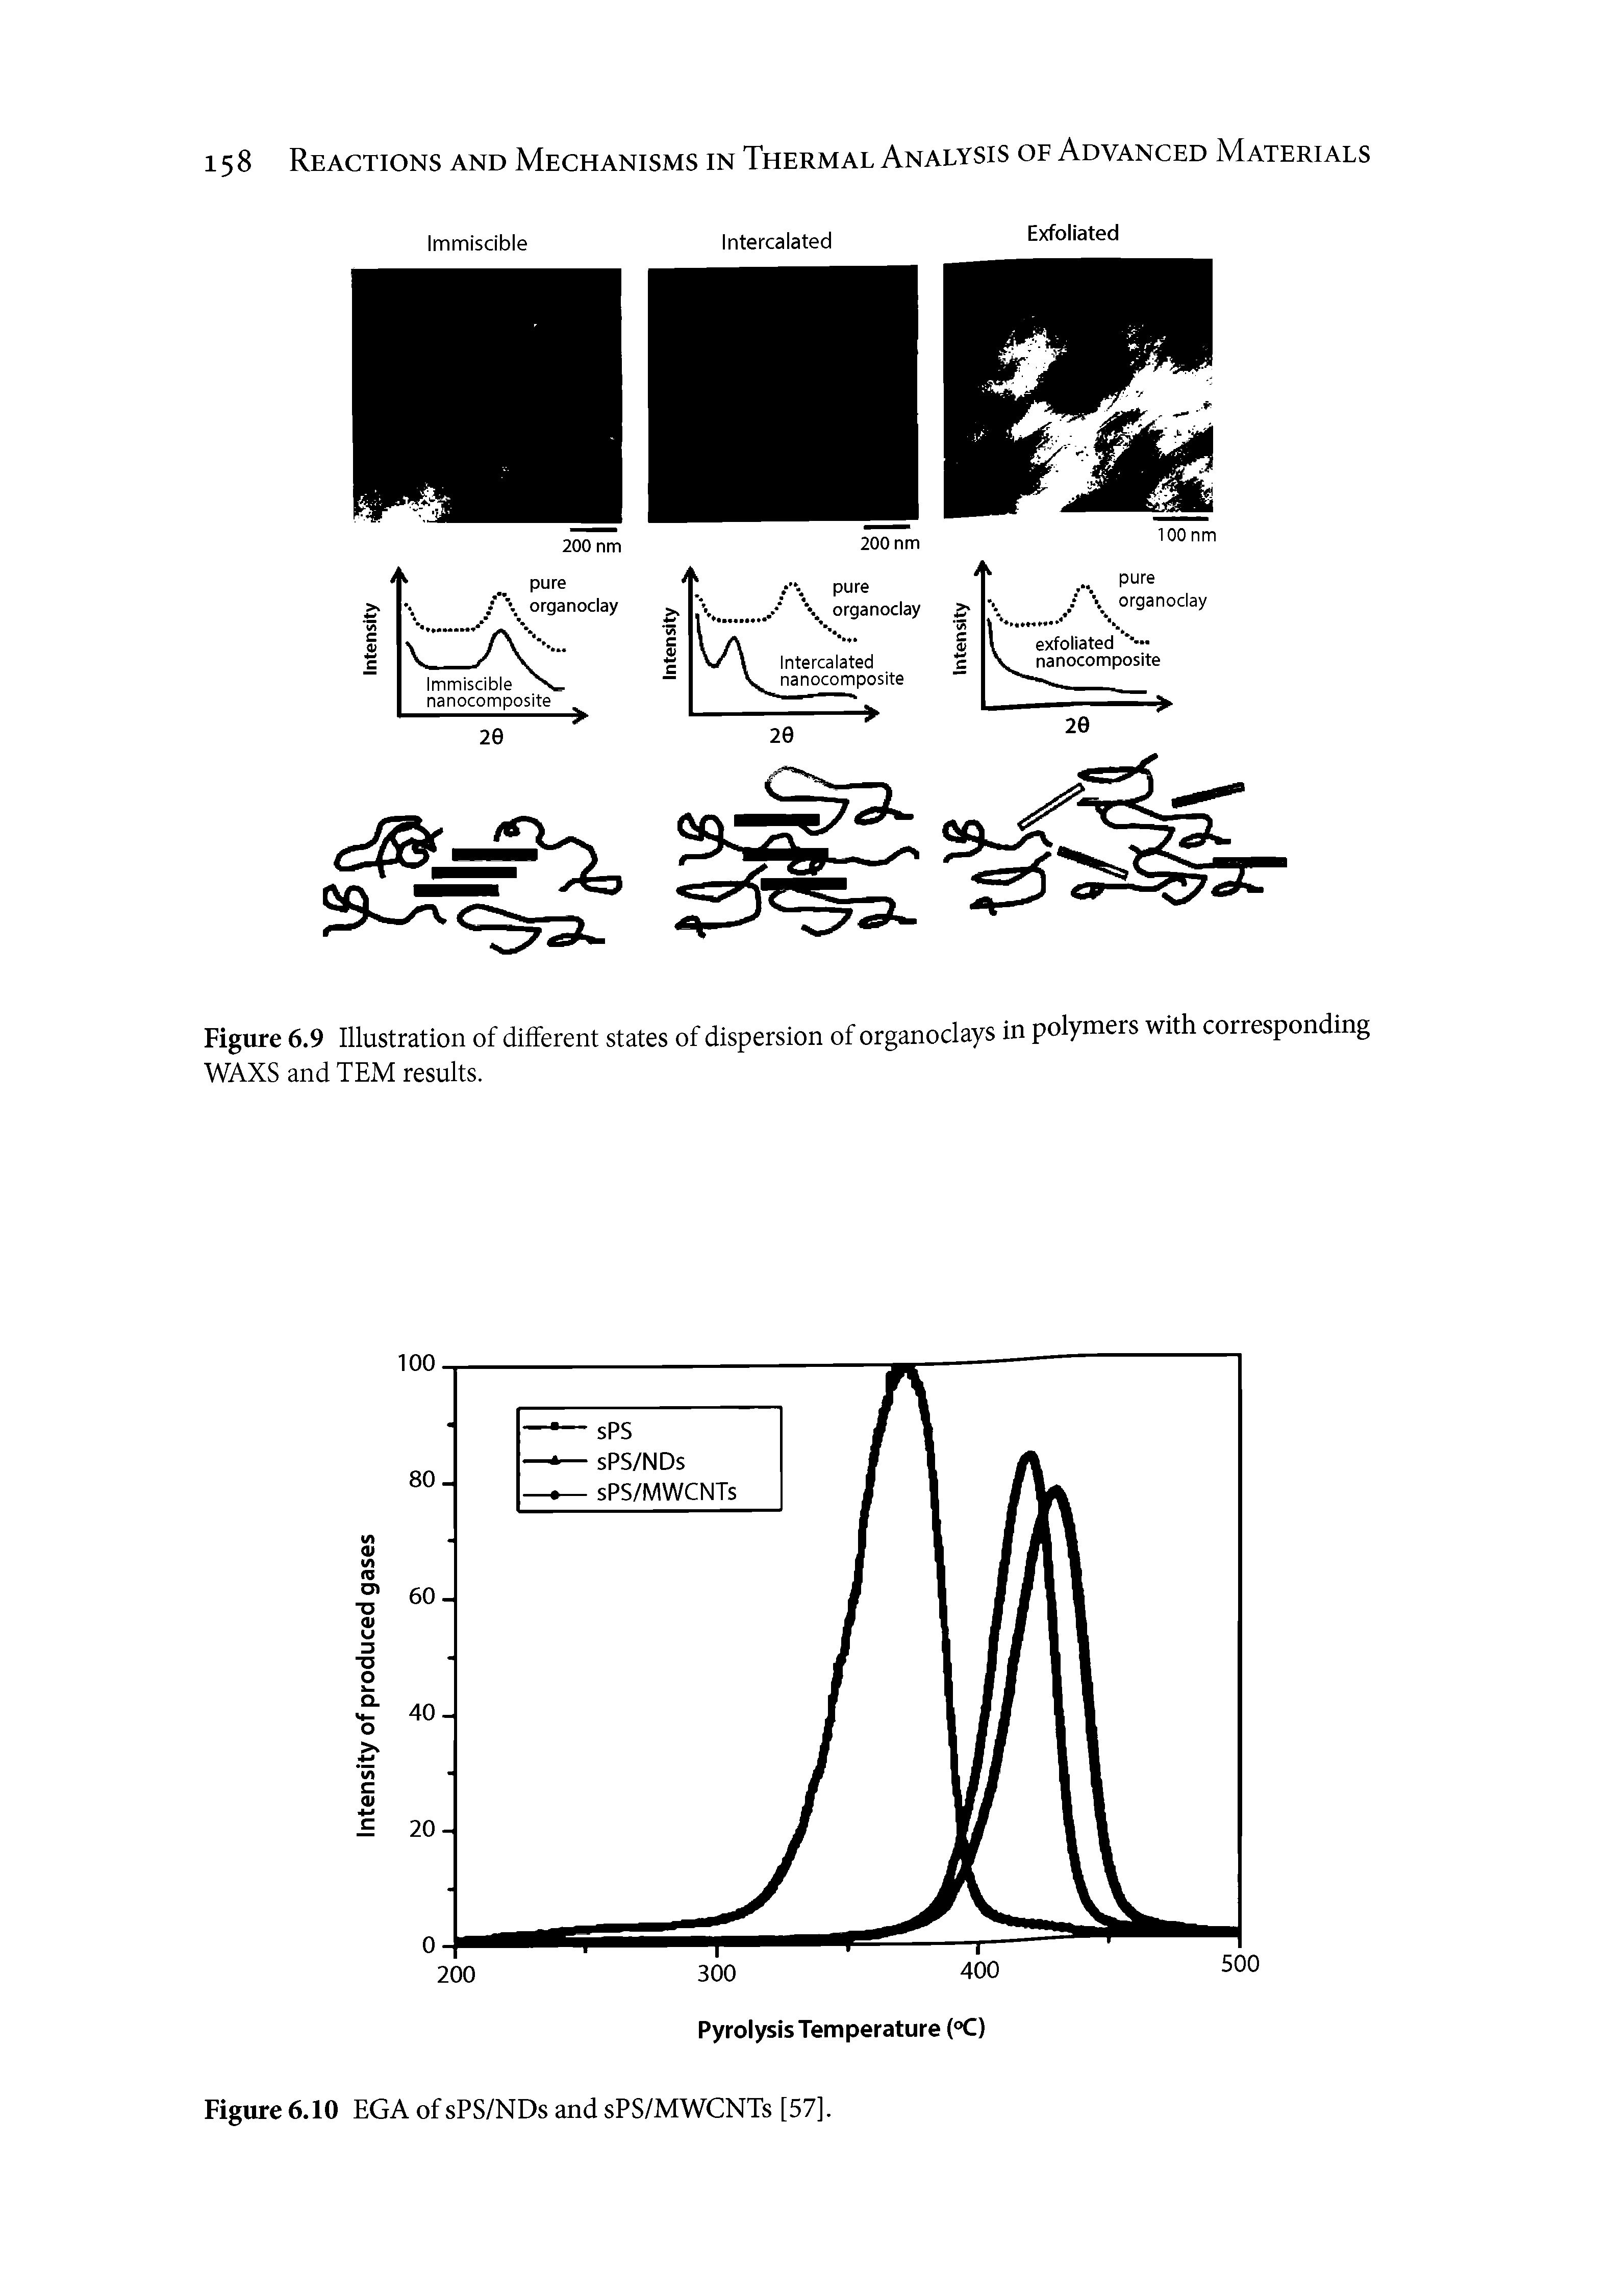 Figure 6.9 Illustration of different states of dispersion of organoclays in polymers with corresponding WAXS and TEM results.